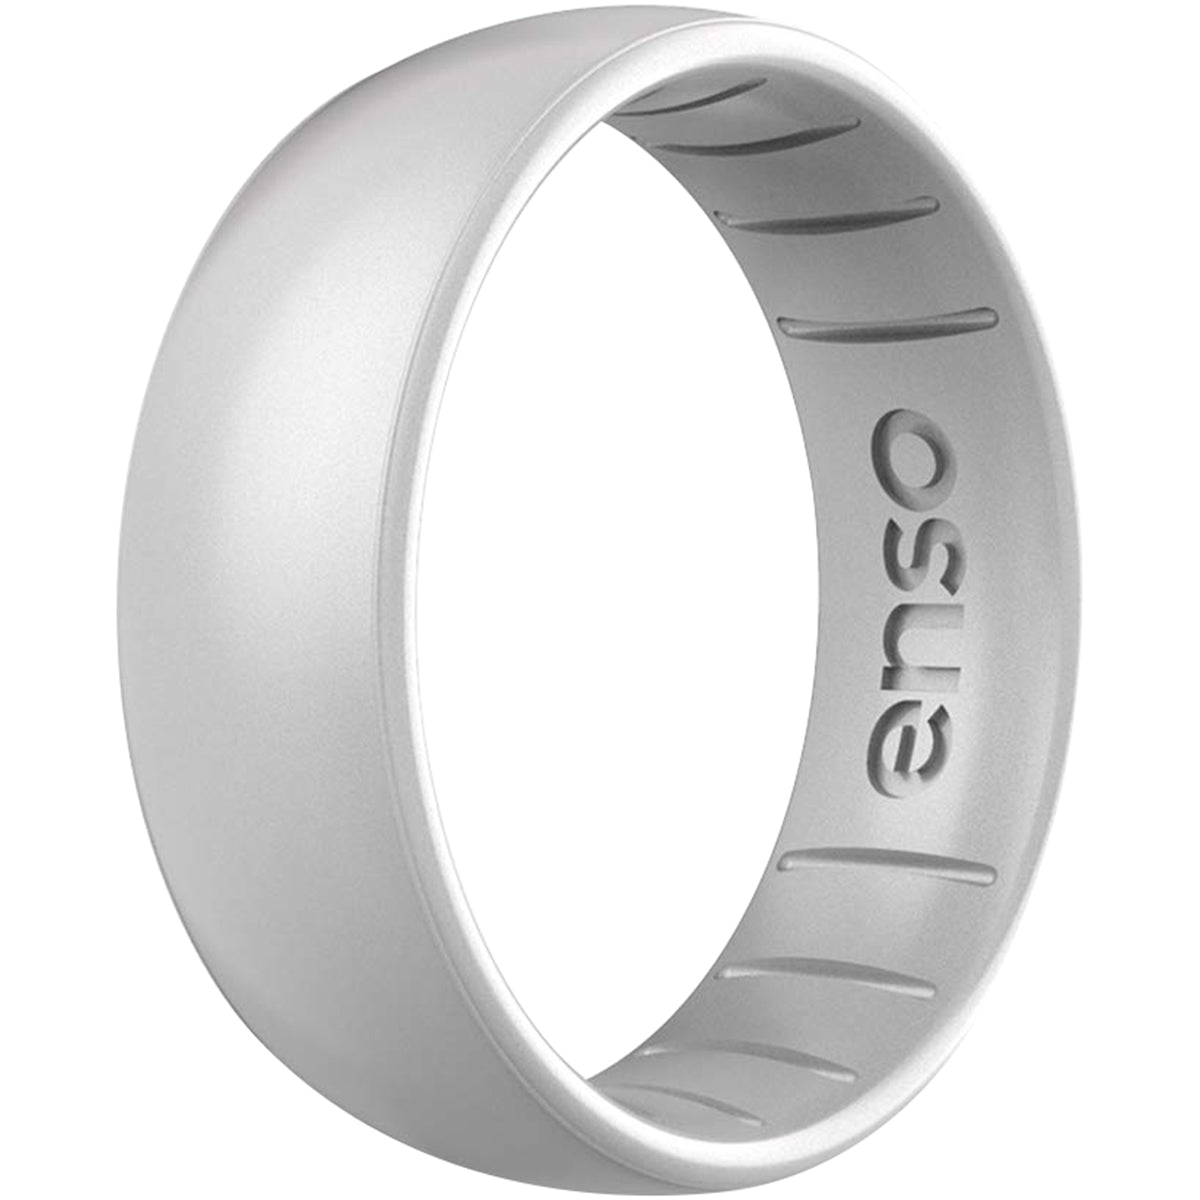 Enso Rings Classic Elements Series Silicone Ring - Silver Enso Rings